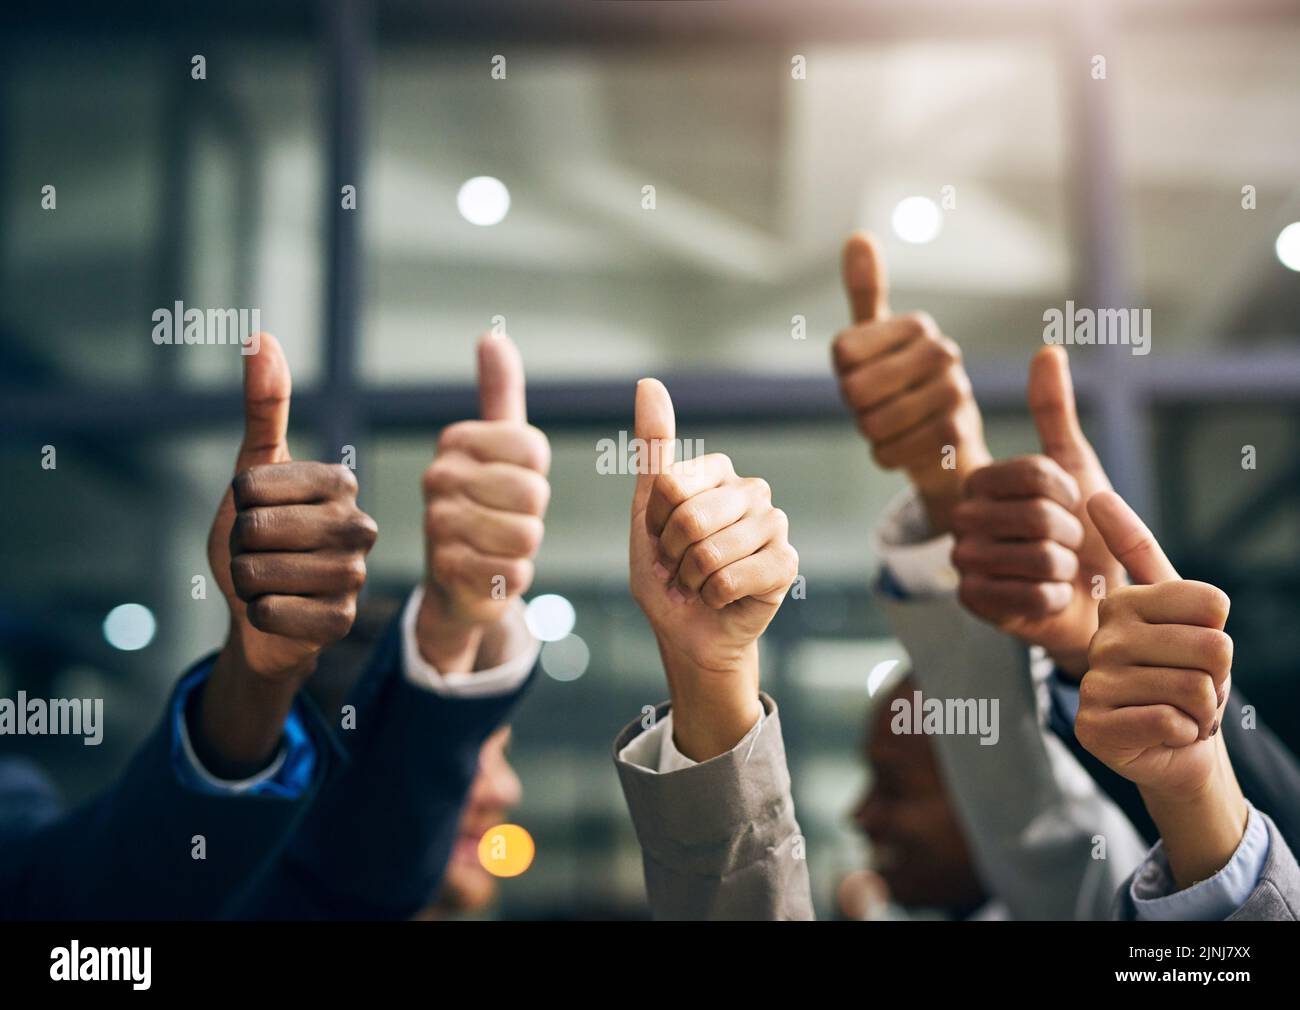 Hands showing thumbs up with business men endorsing, giving approval or saying thank you as a team in the office. Closeup of corporate professionals Stock Photo